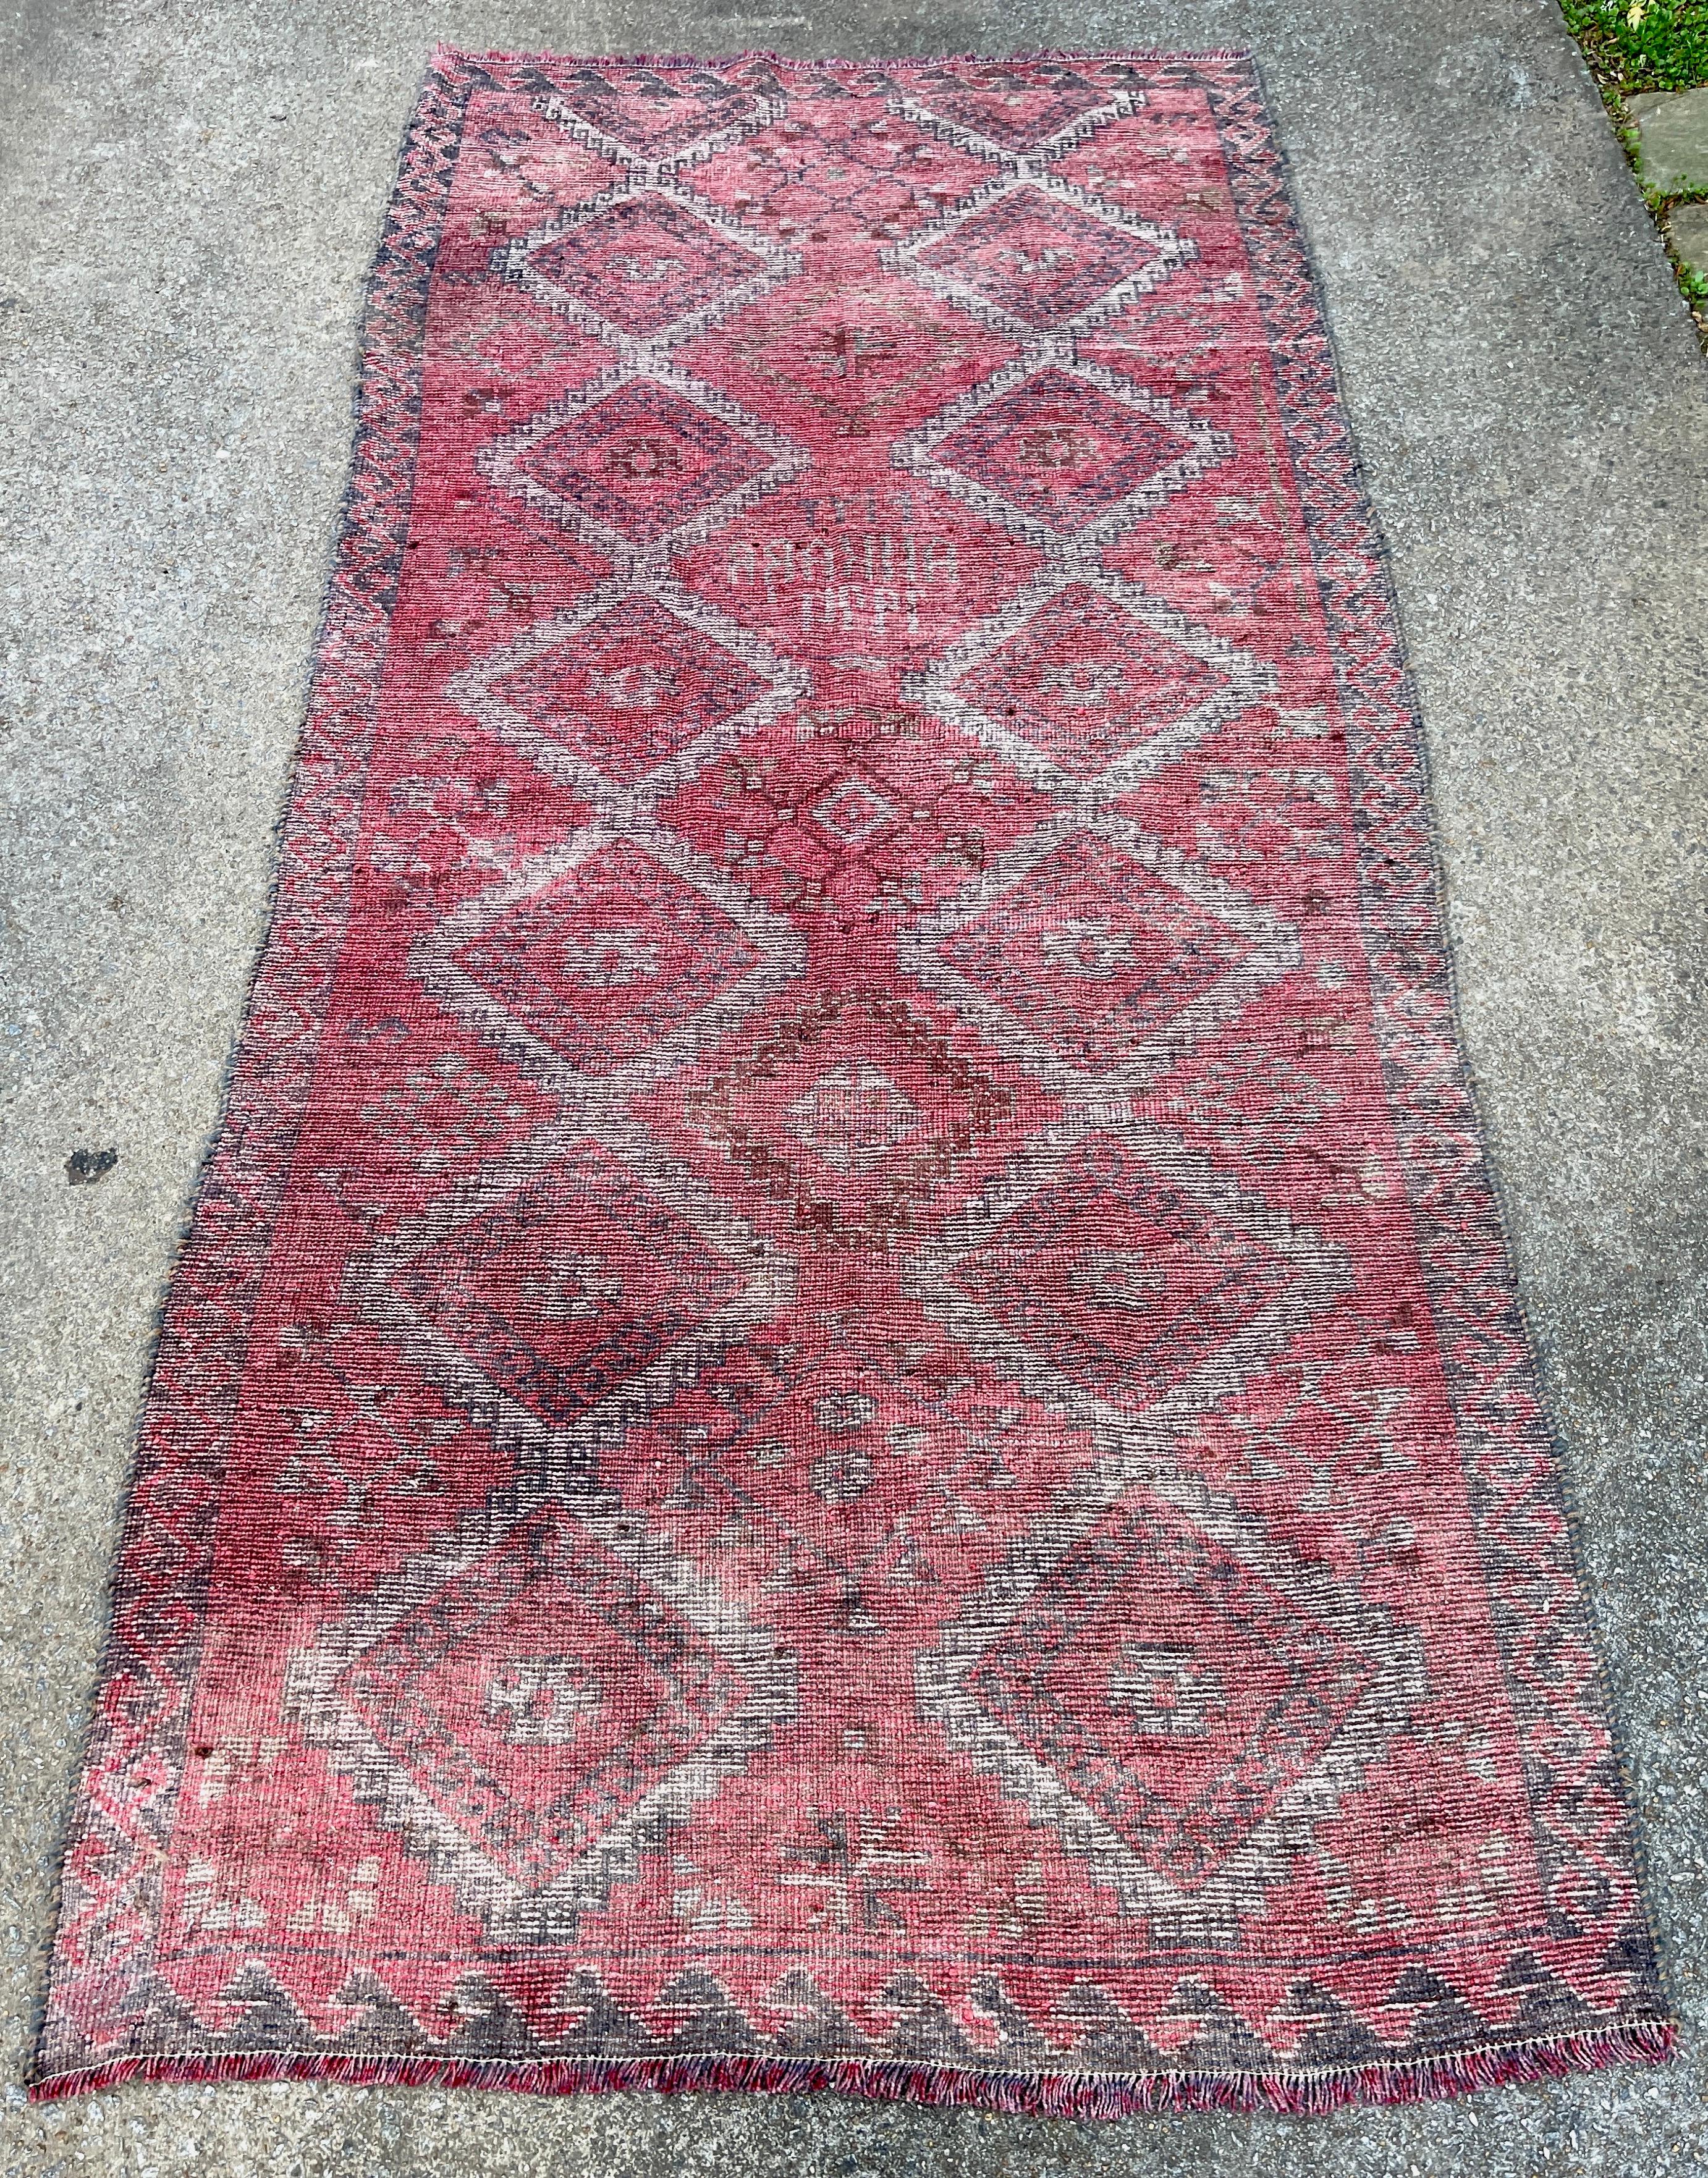 Distressed Hand-Knotted Wool Caucasian Rug 'Reservable' Signed & Dated 1994 For Sale 4